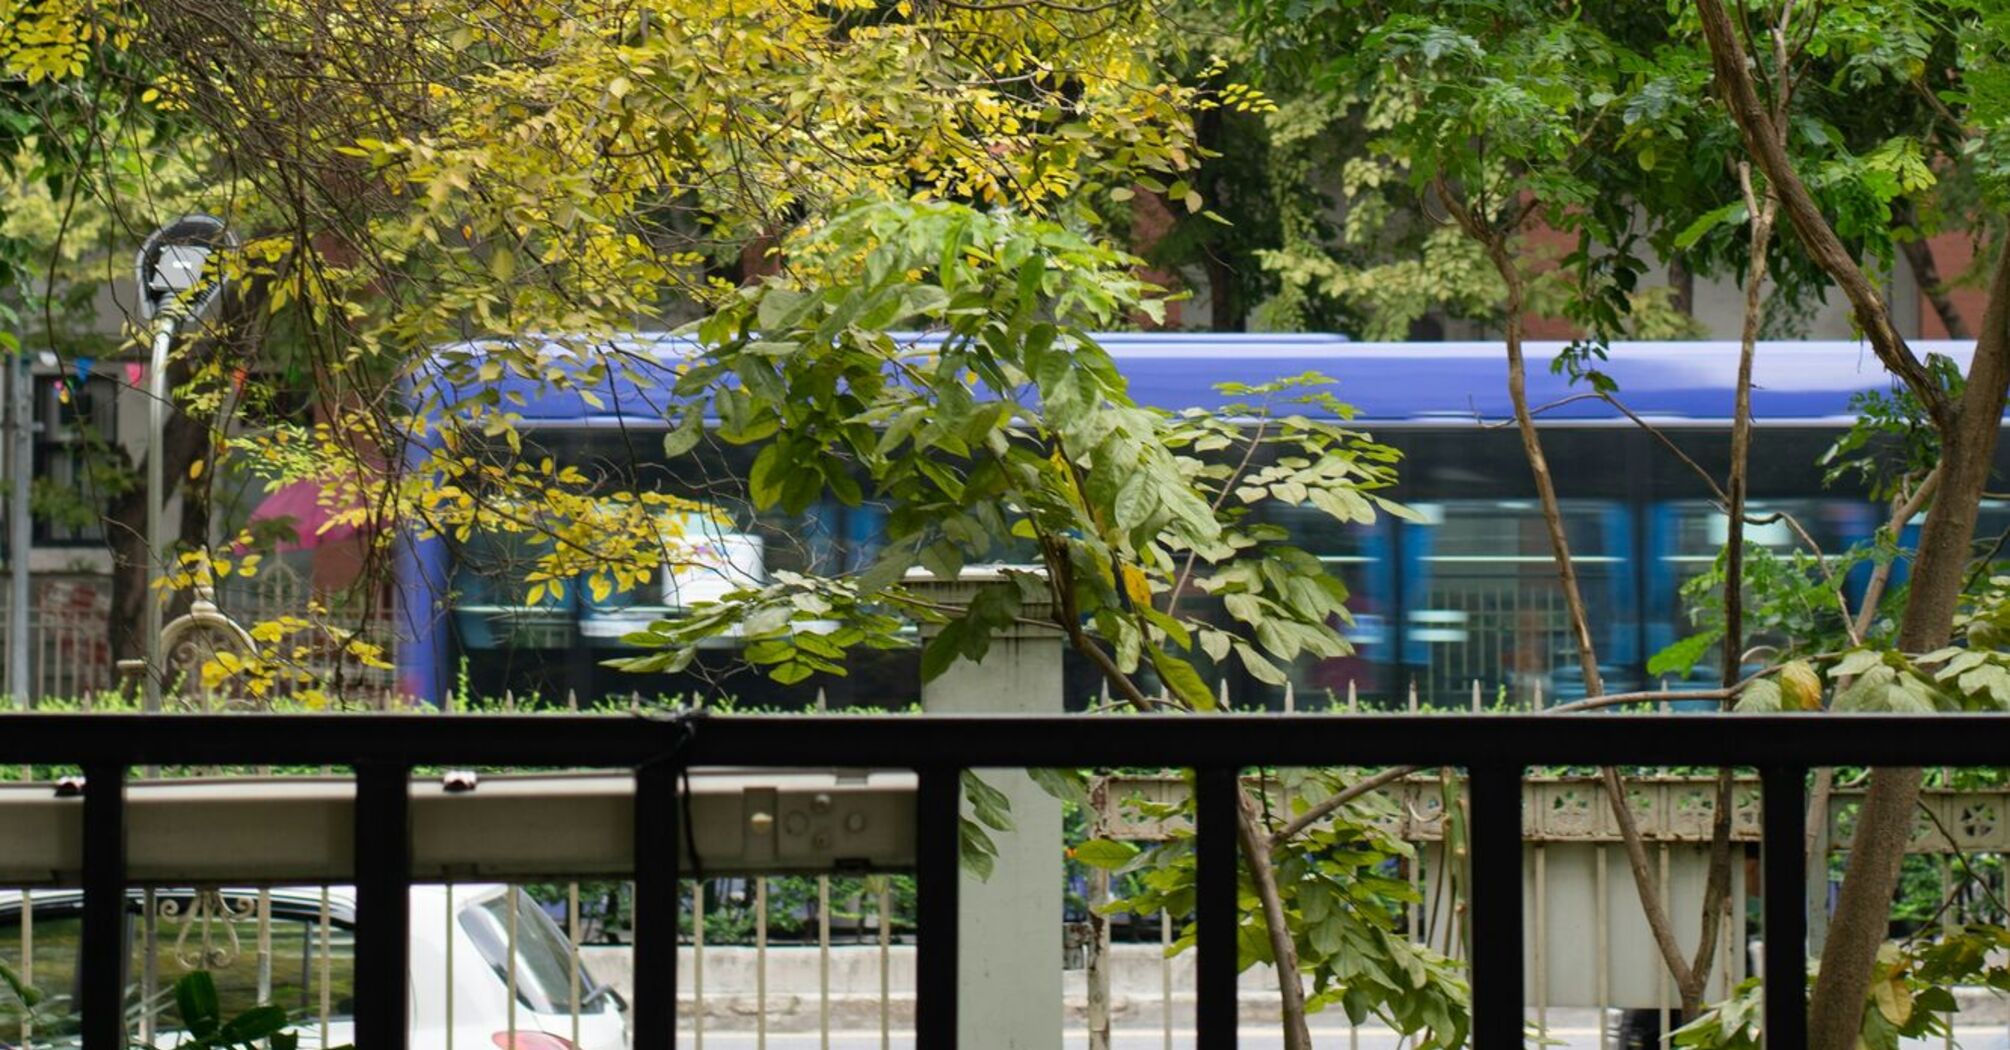 Blue bus passing by lush green and yellow trees in an urban park setting